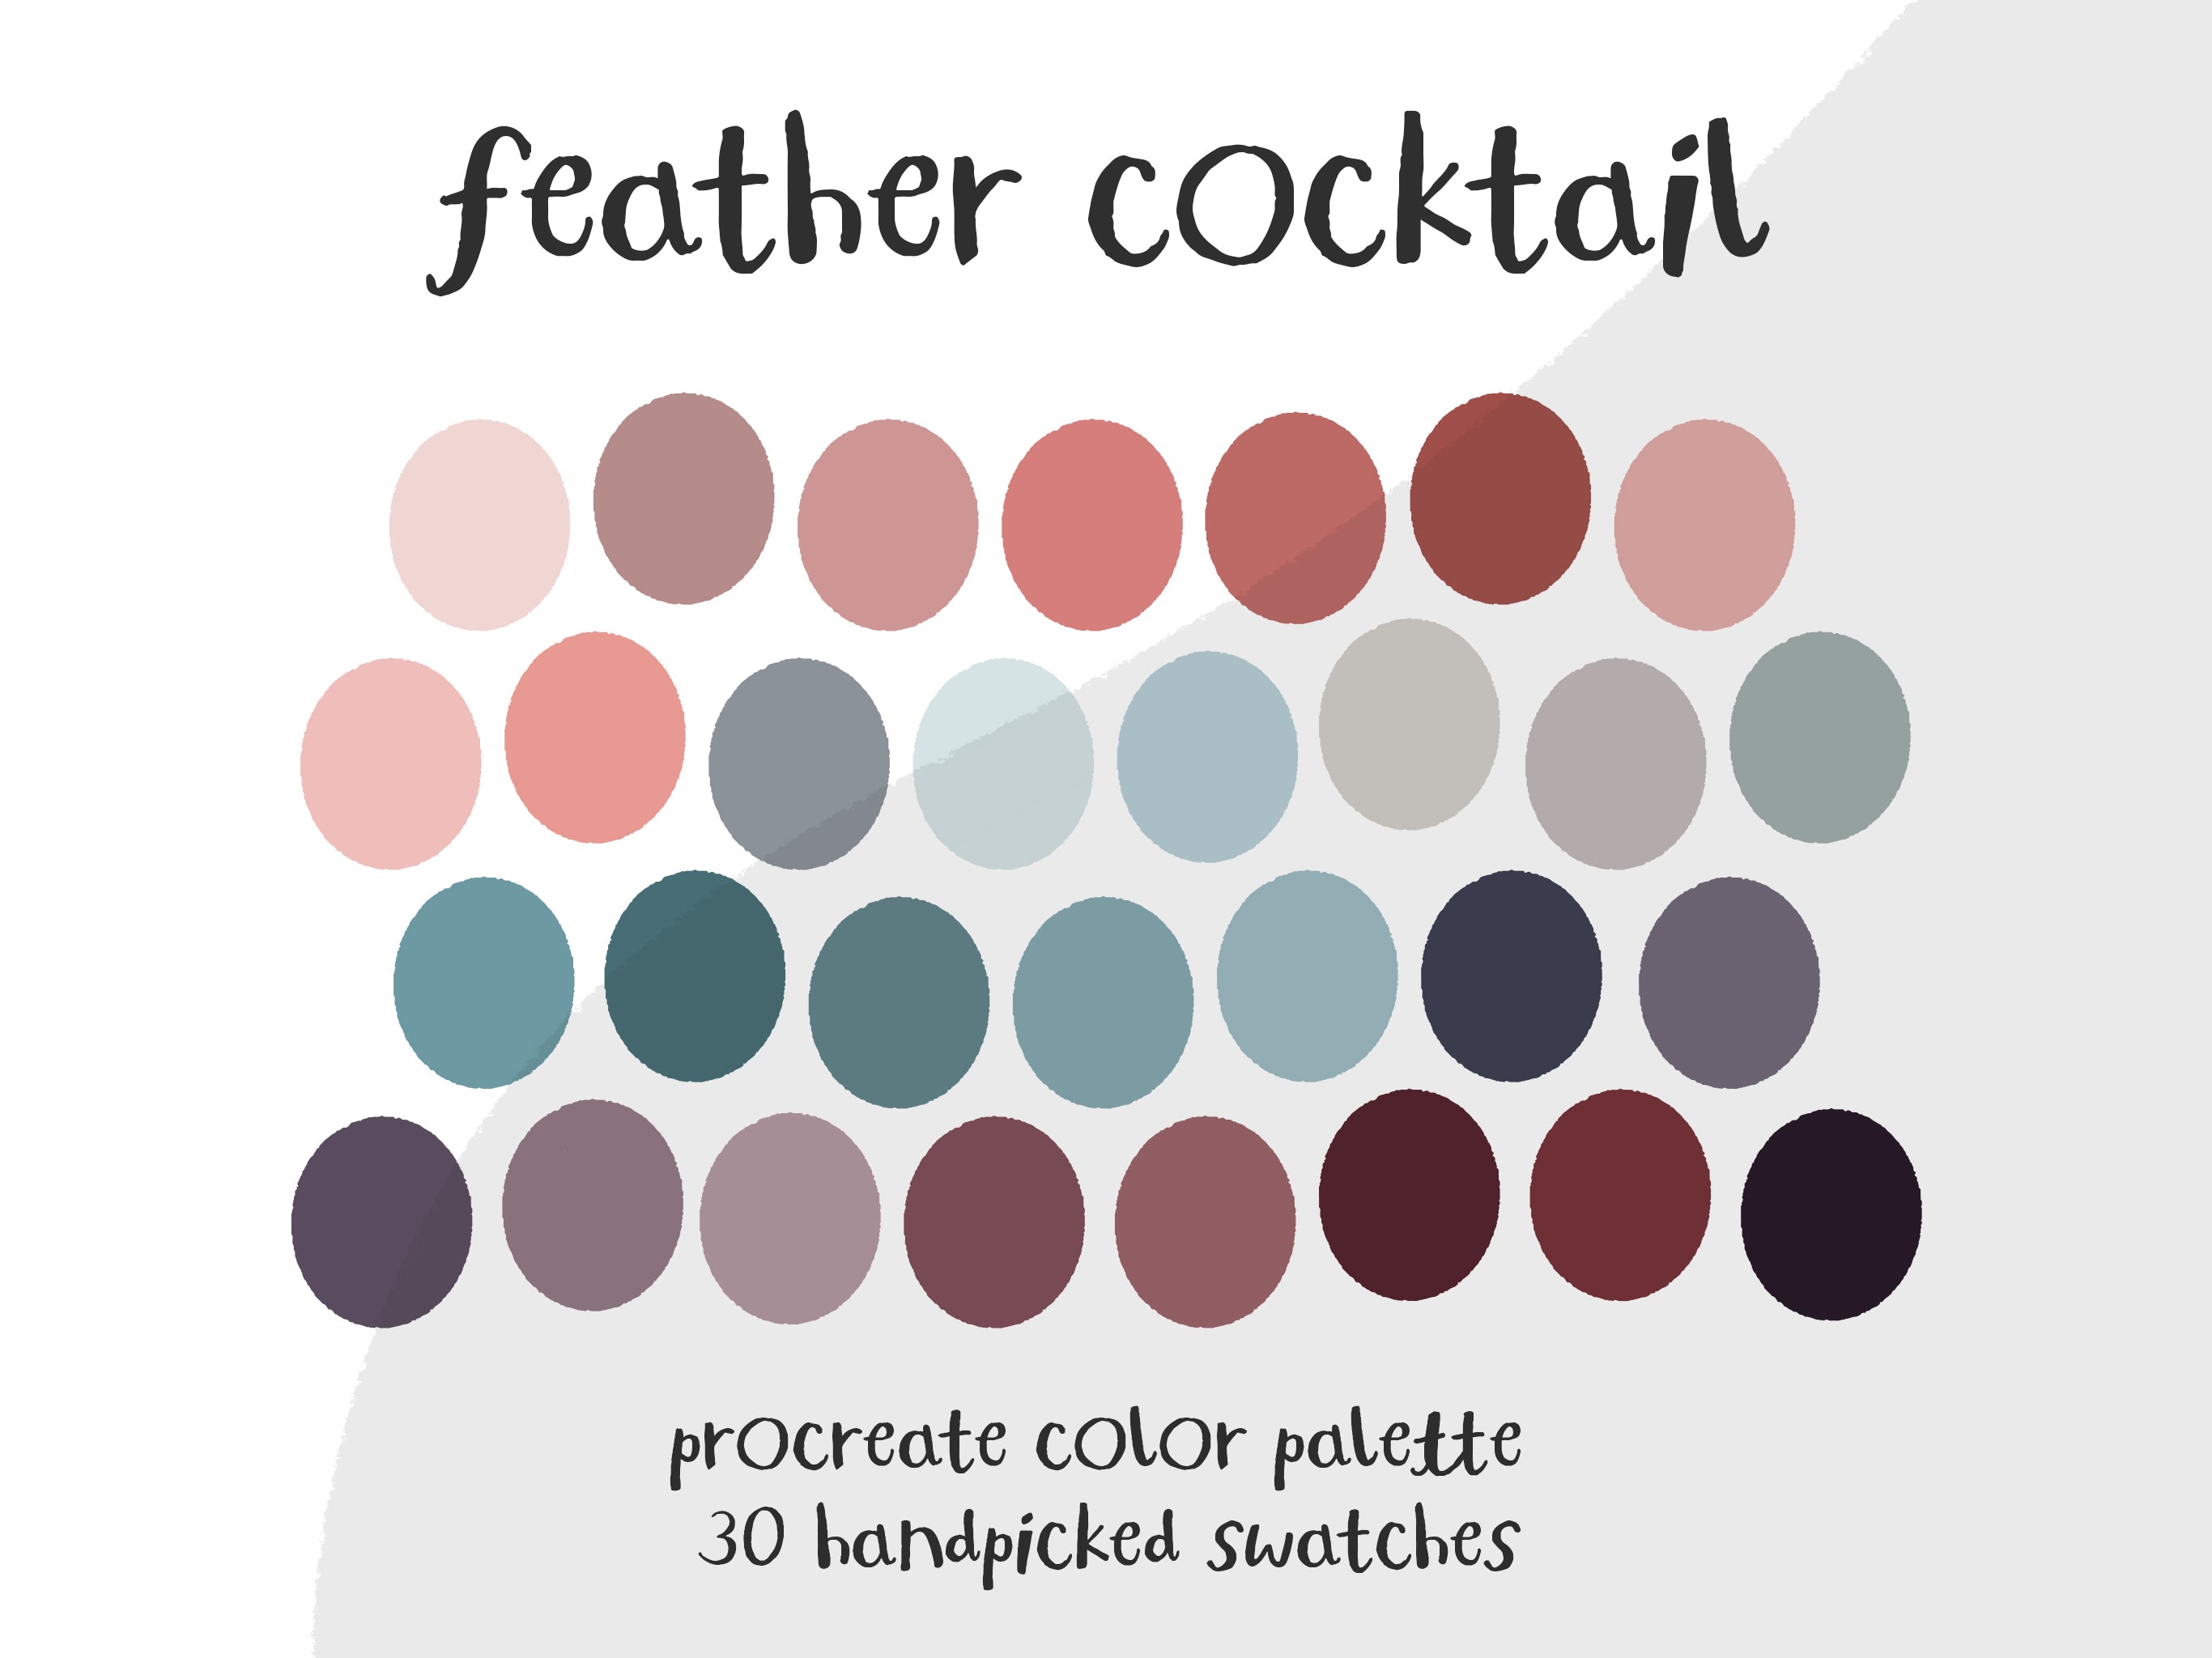 Feather Cocktail